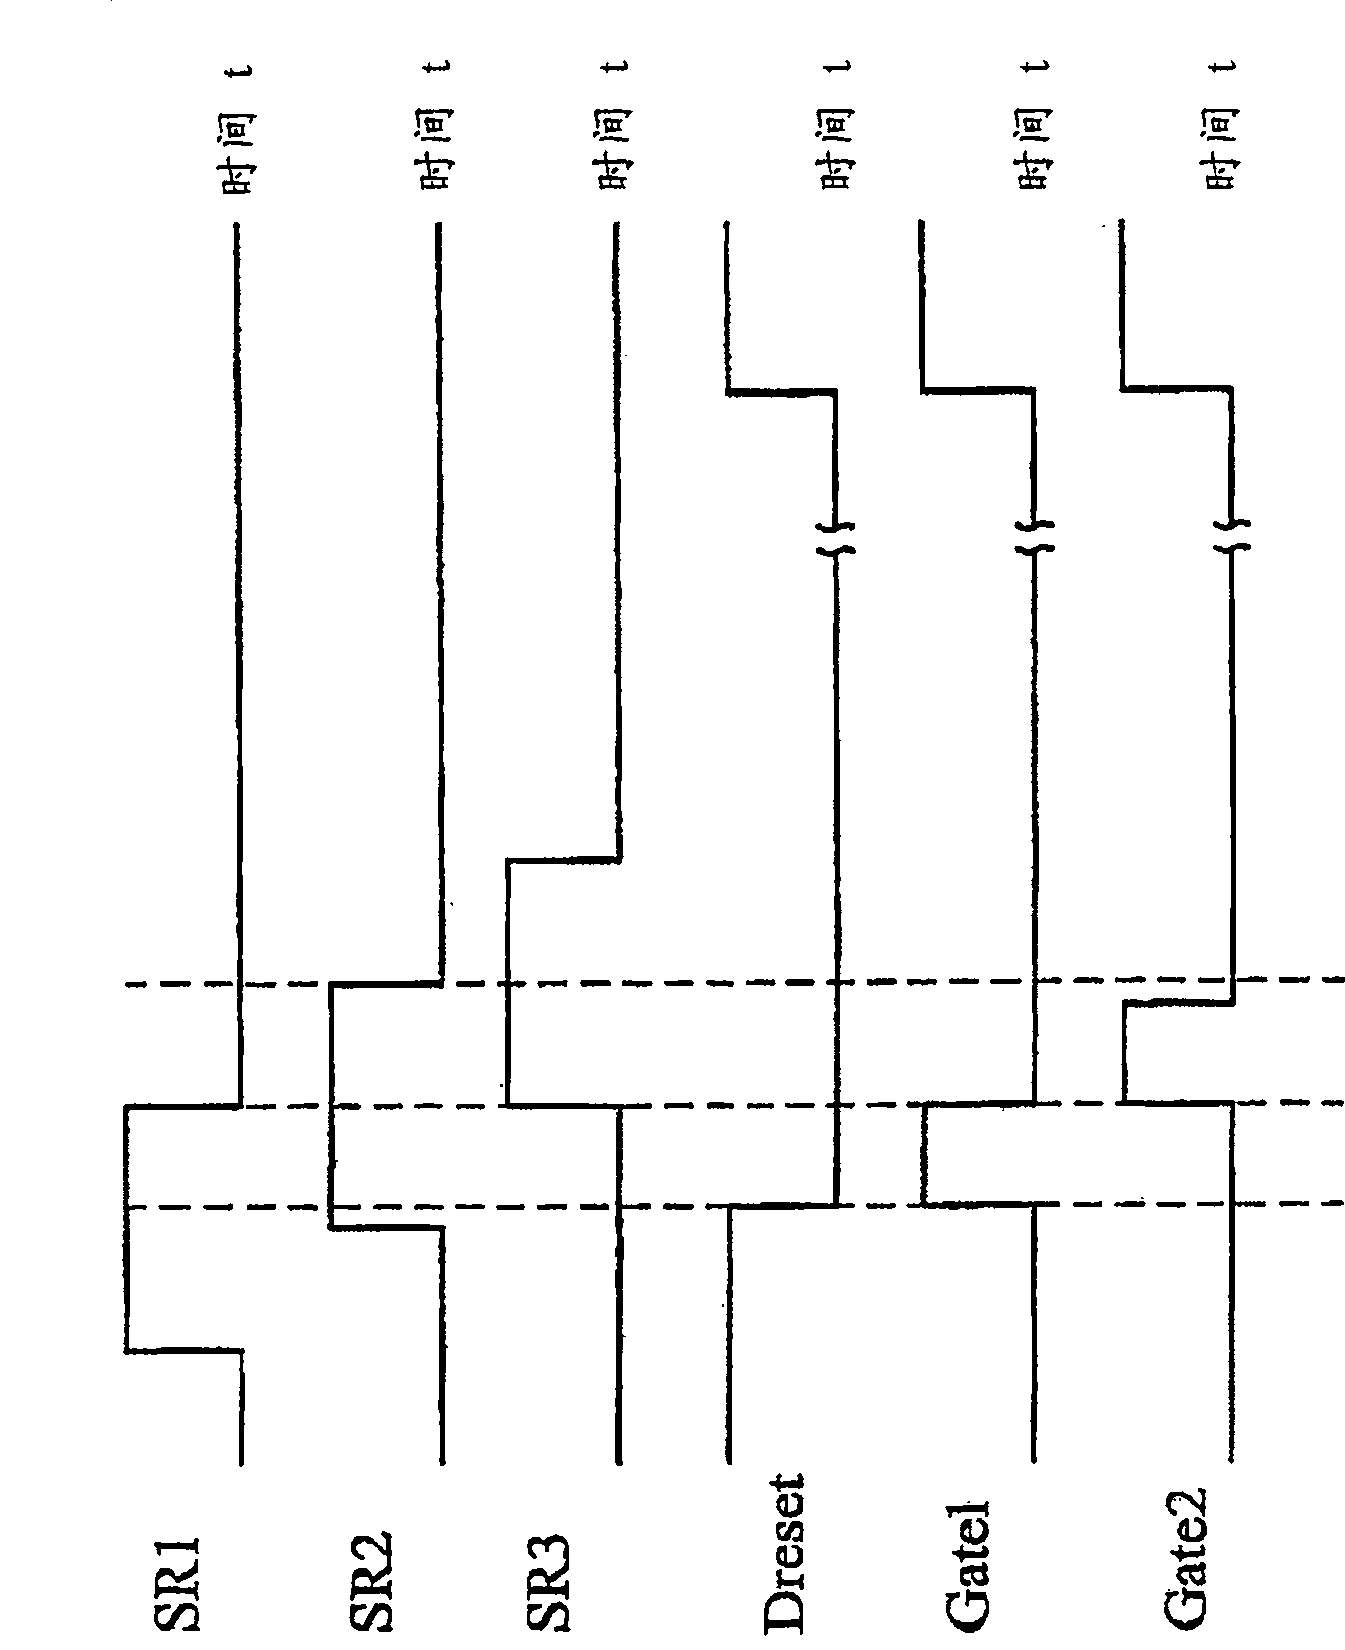 Grid drive circuit, liquid crystal display device and electronic device